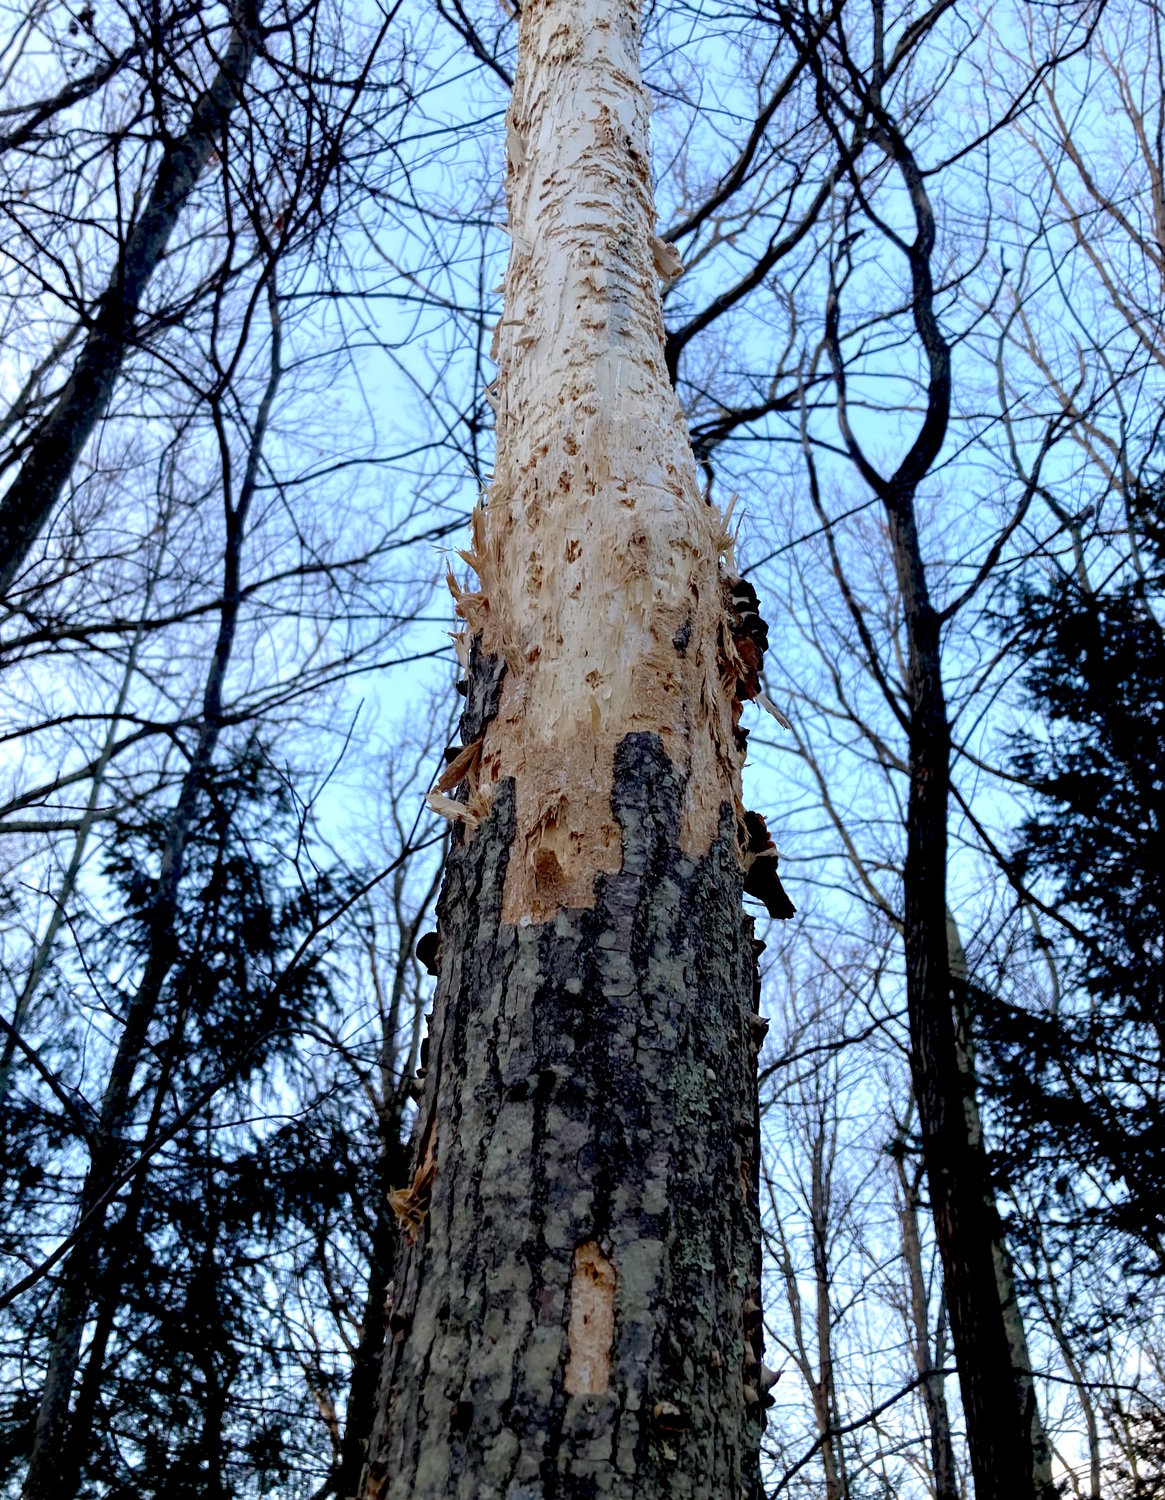 The dead tree depicted here reveals examples of bark sloughing (toward the top), bark gleaning (toward the bottom) and clusters of single pecking holes known as hunting impact marks (toward the center).